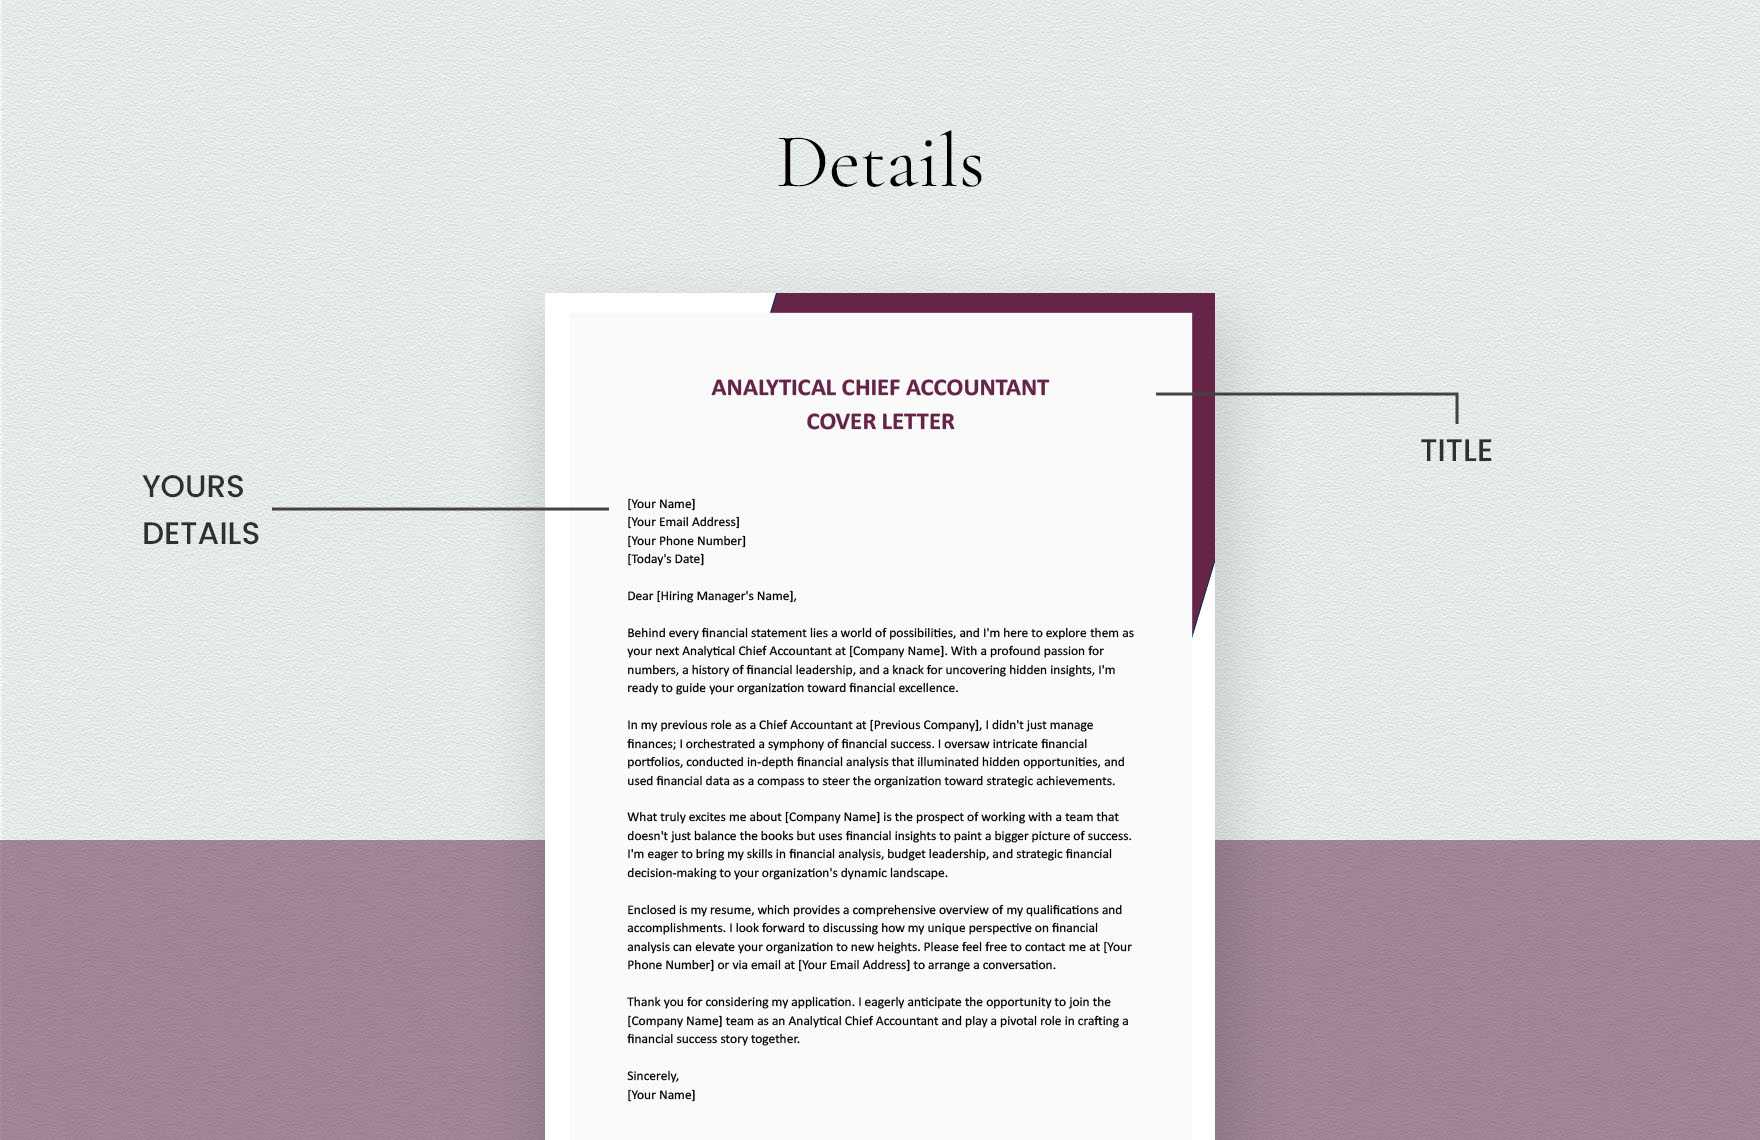 Analytical Chief Accountant Cover Letter